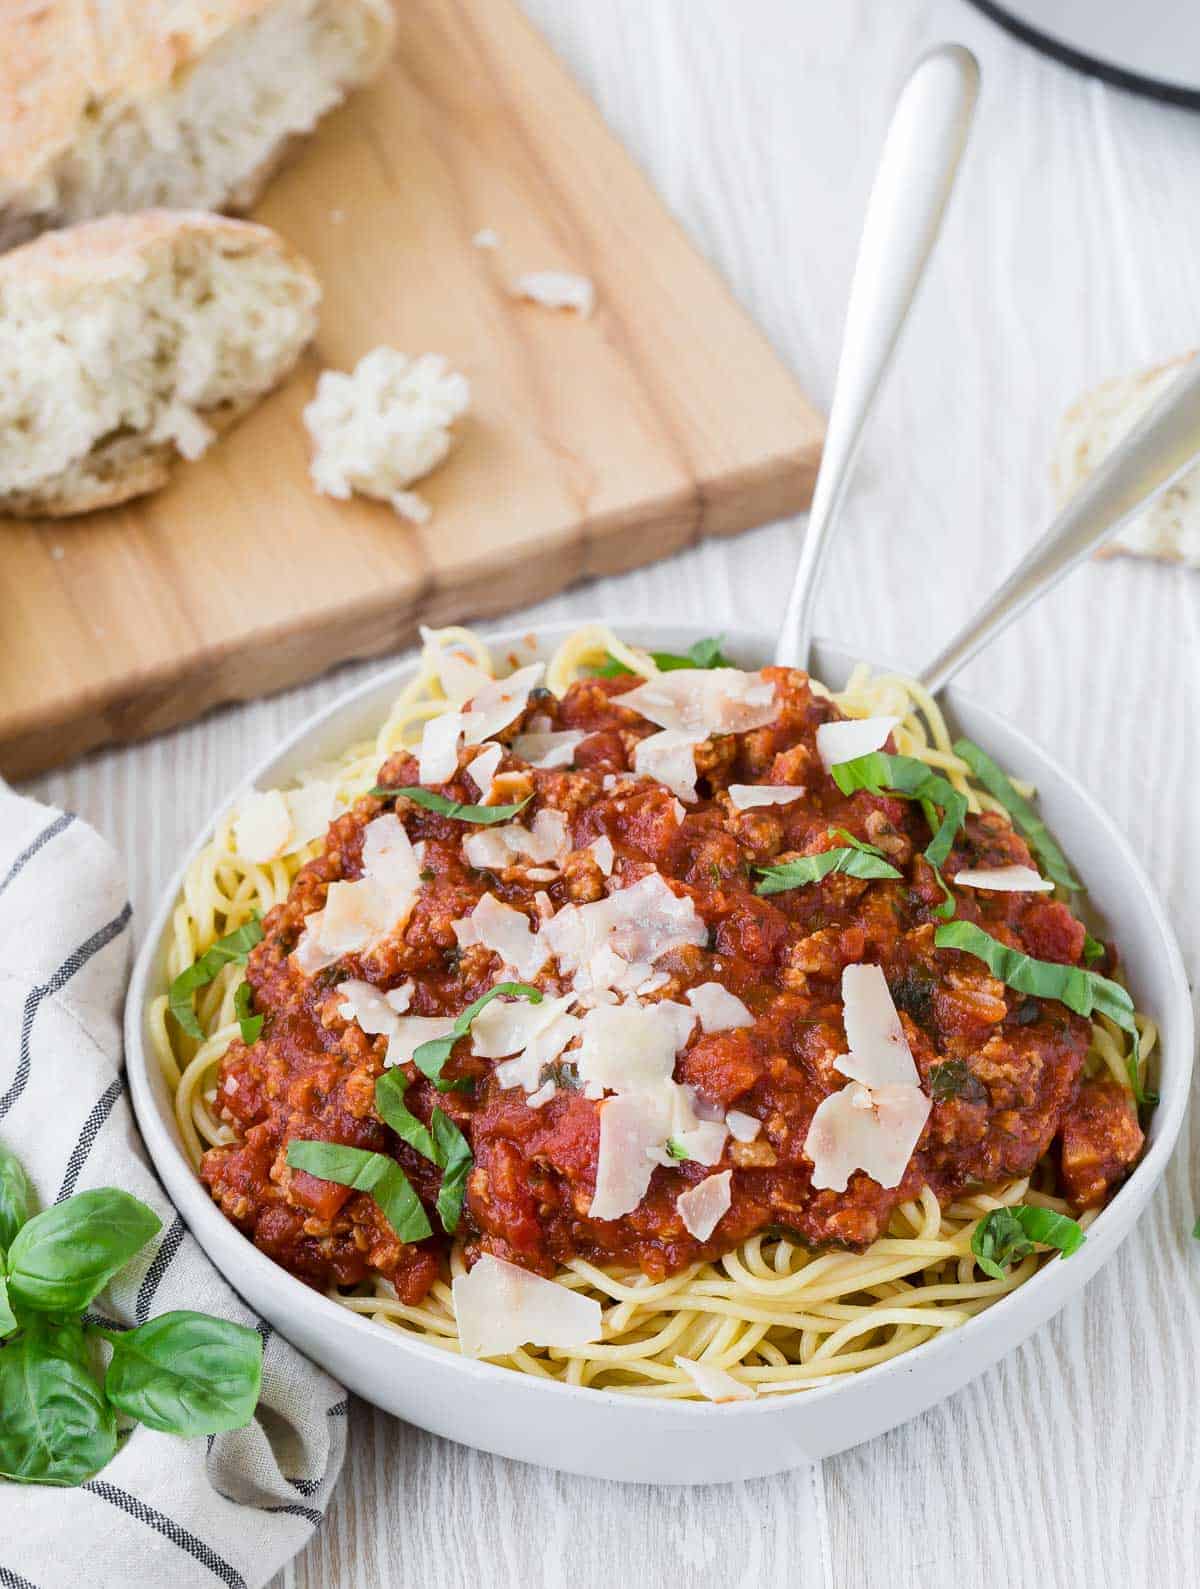 Spaghetti and meat sauce in a white bowl with fresh basil and parmesan garnishes.